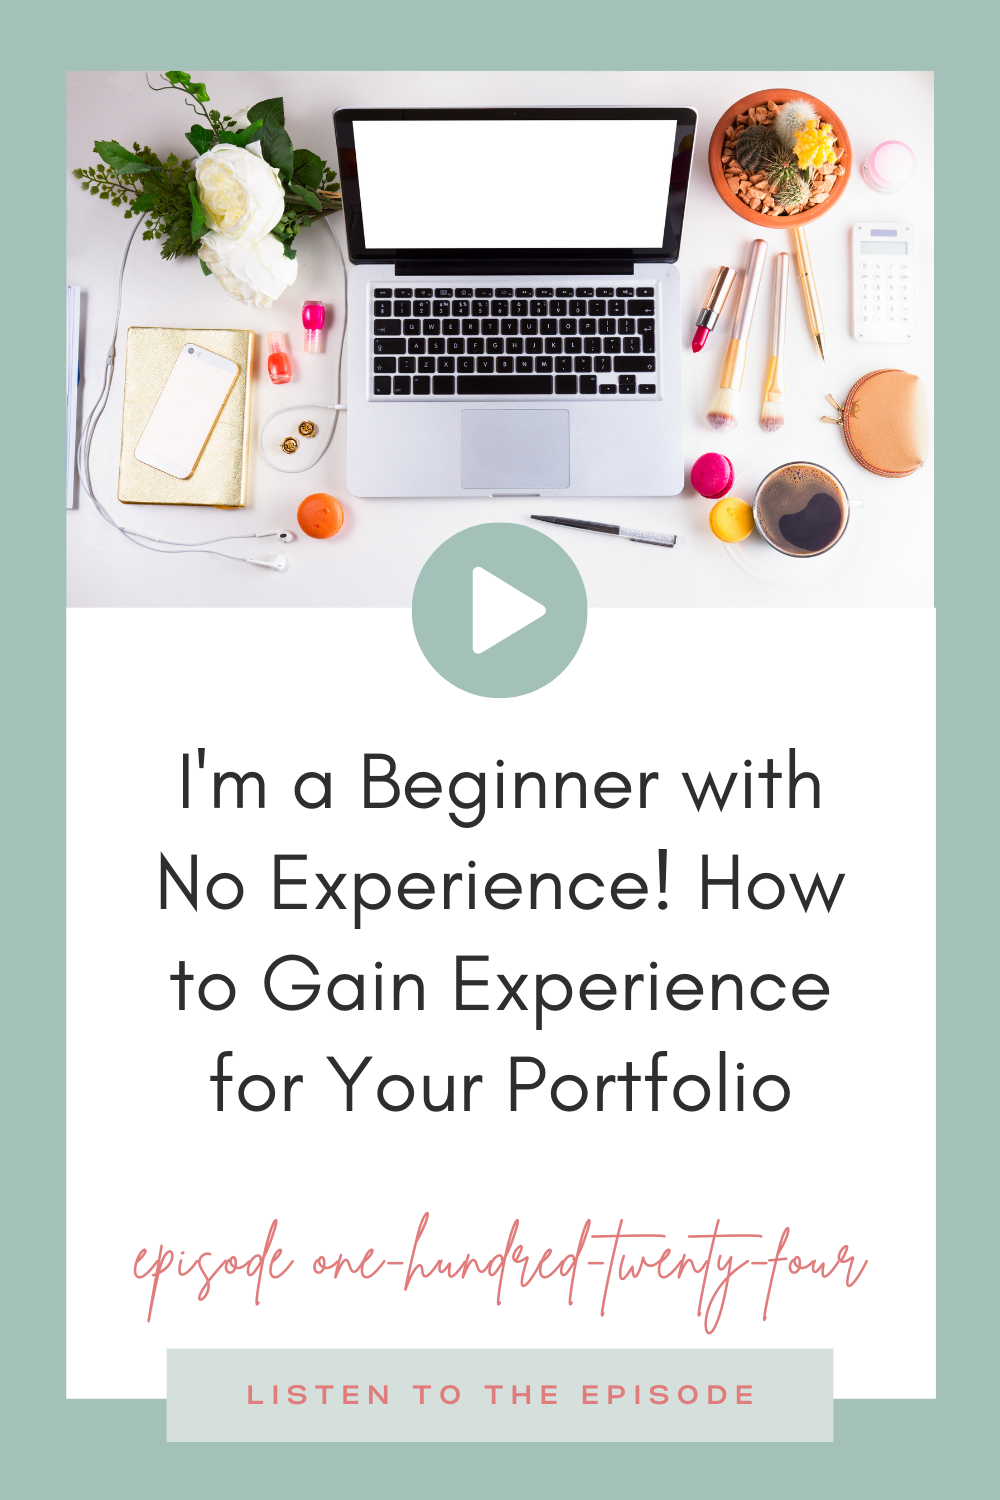 I'm a Beginner with No Experience! How to Gain Experience for Your Portfolio